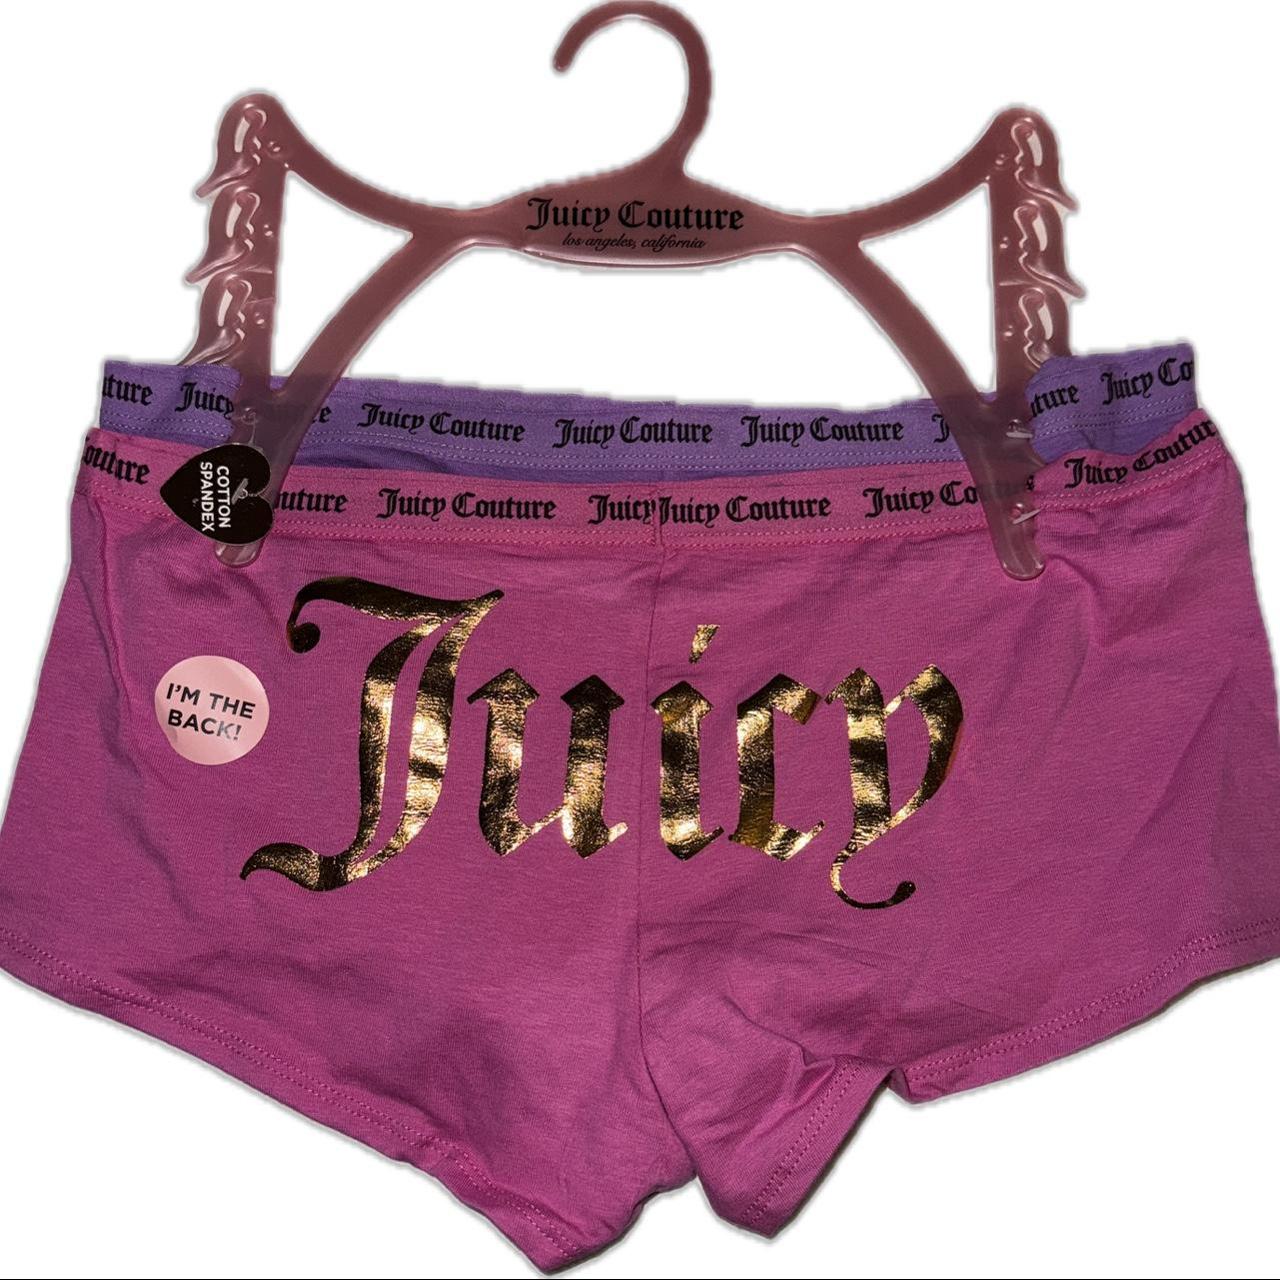 New with tags. Juicy Couture Intimate Panties. - Depop